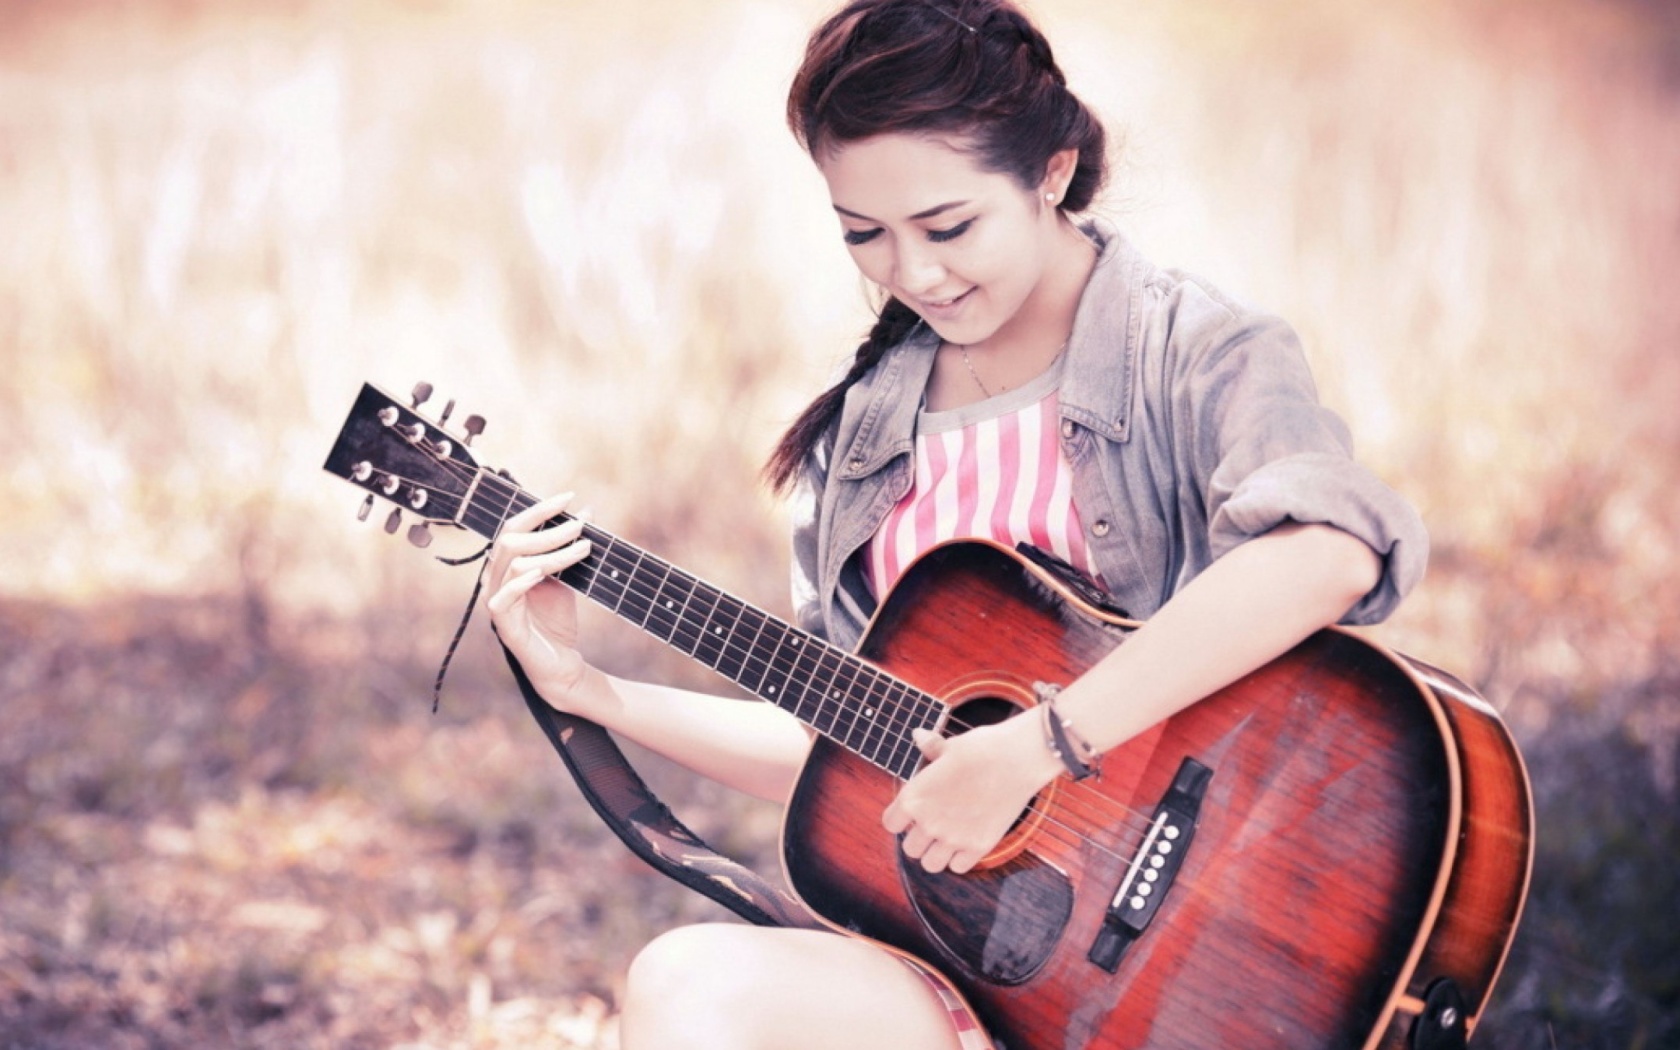 Das Chinese girl with guitar Wallpaper 1680x1050